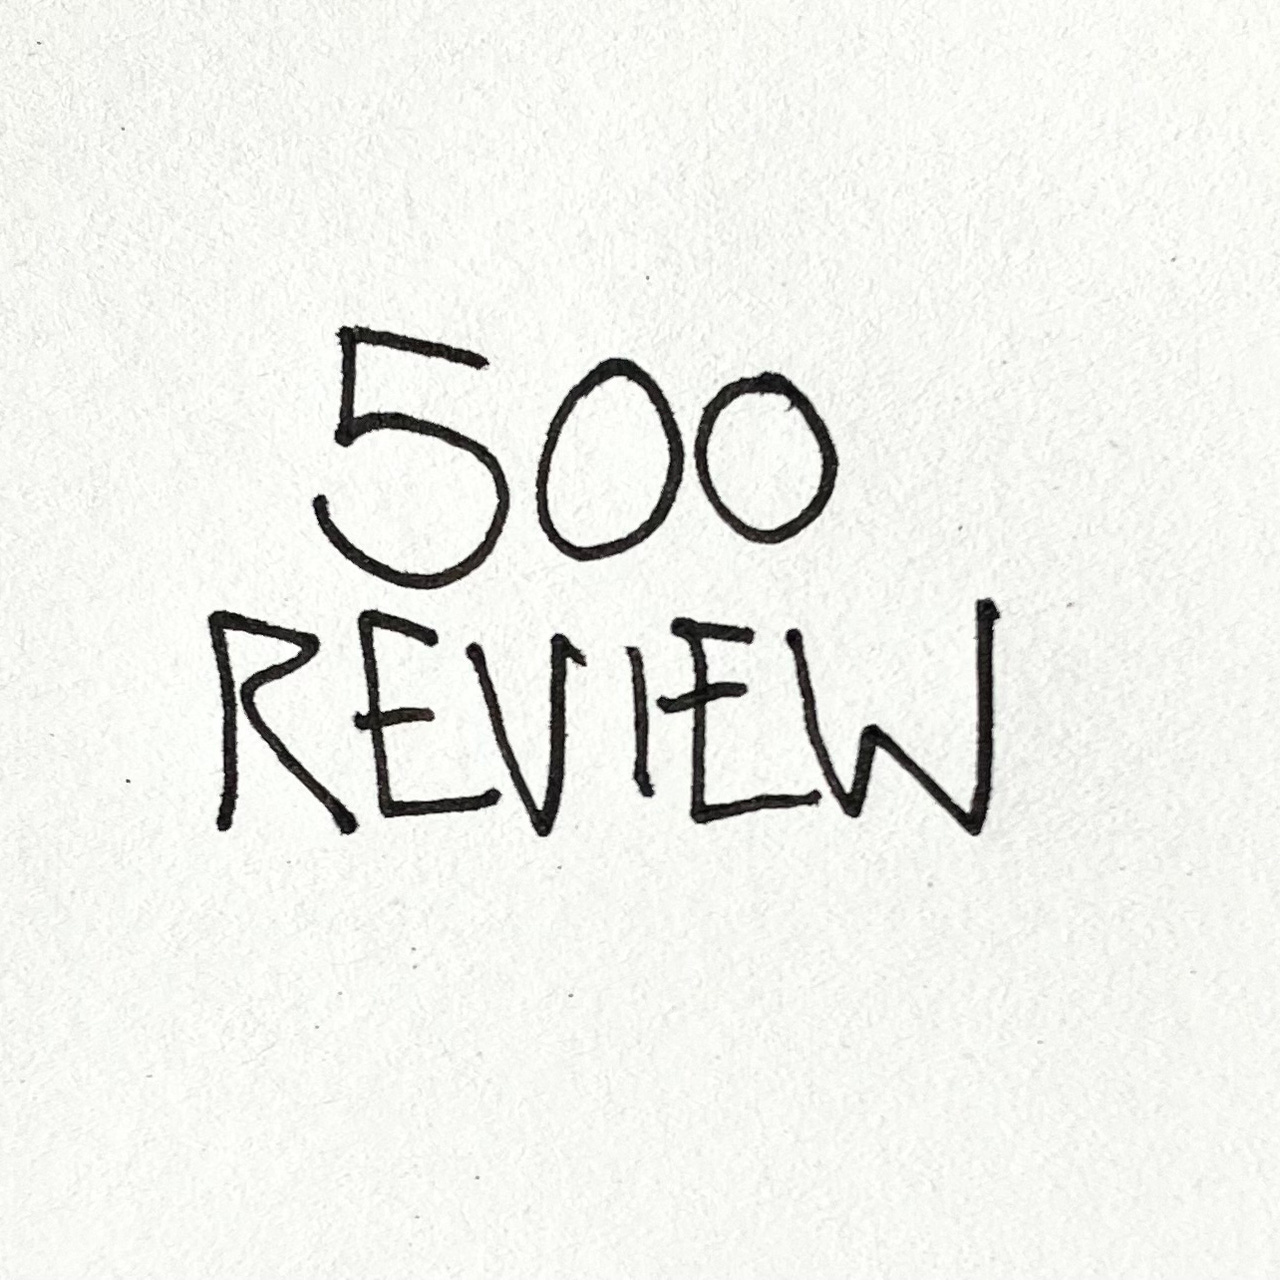 500 Review